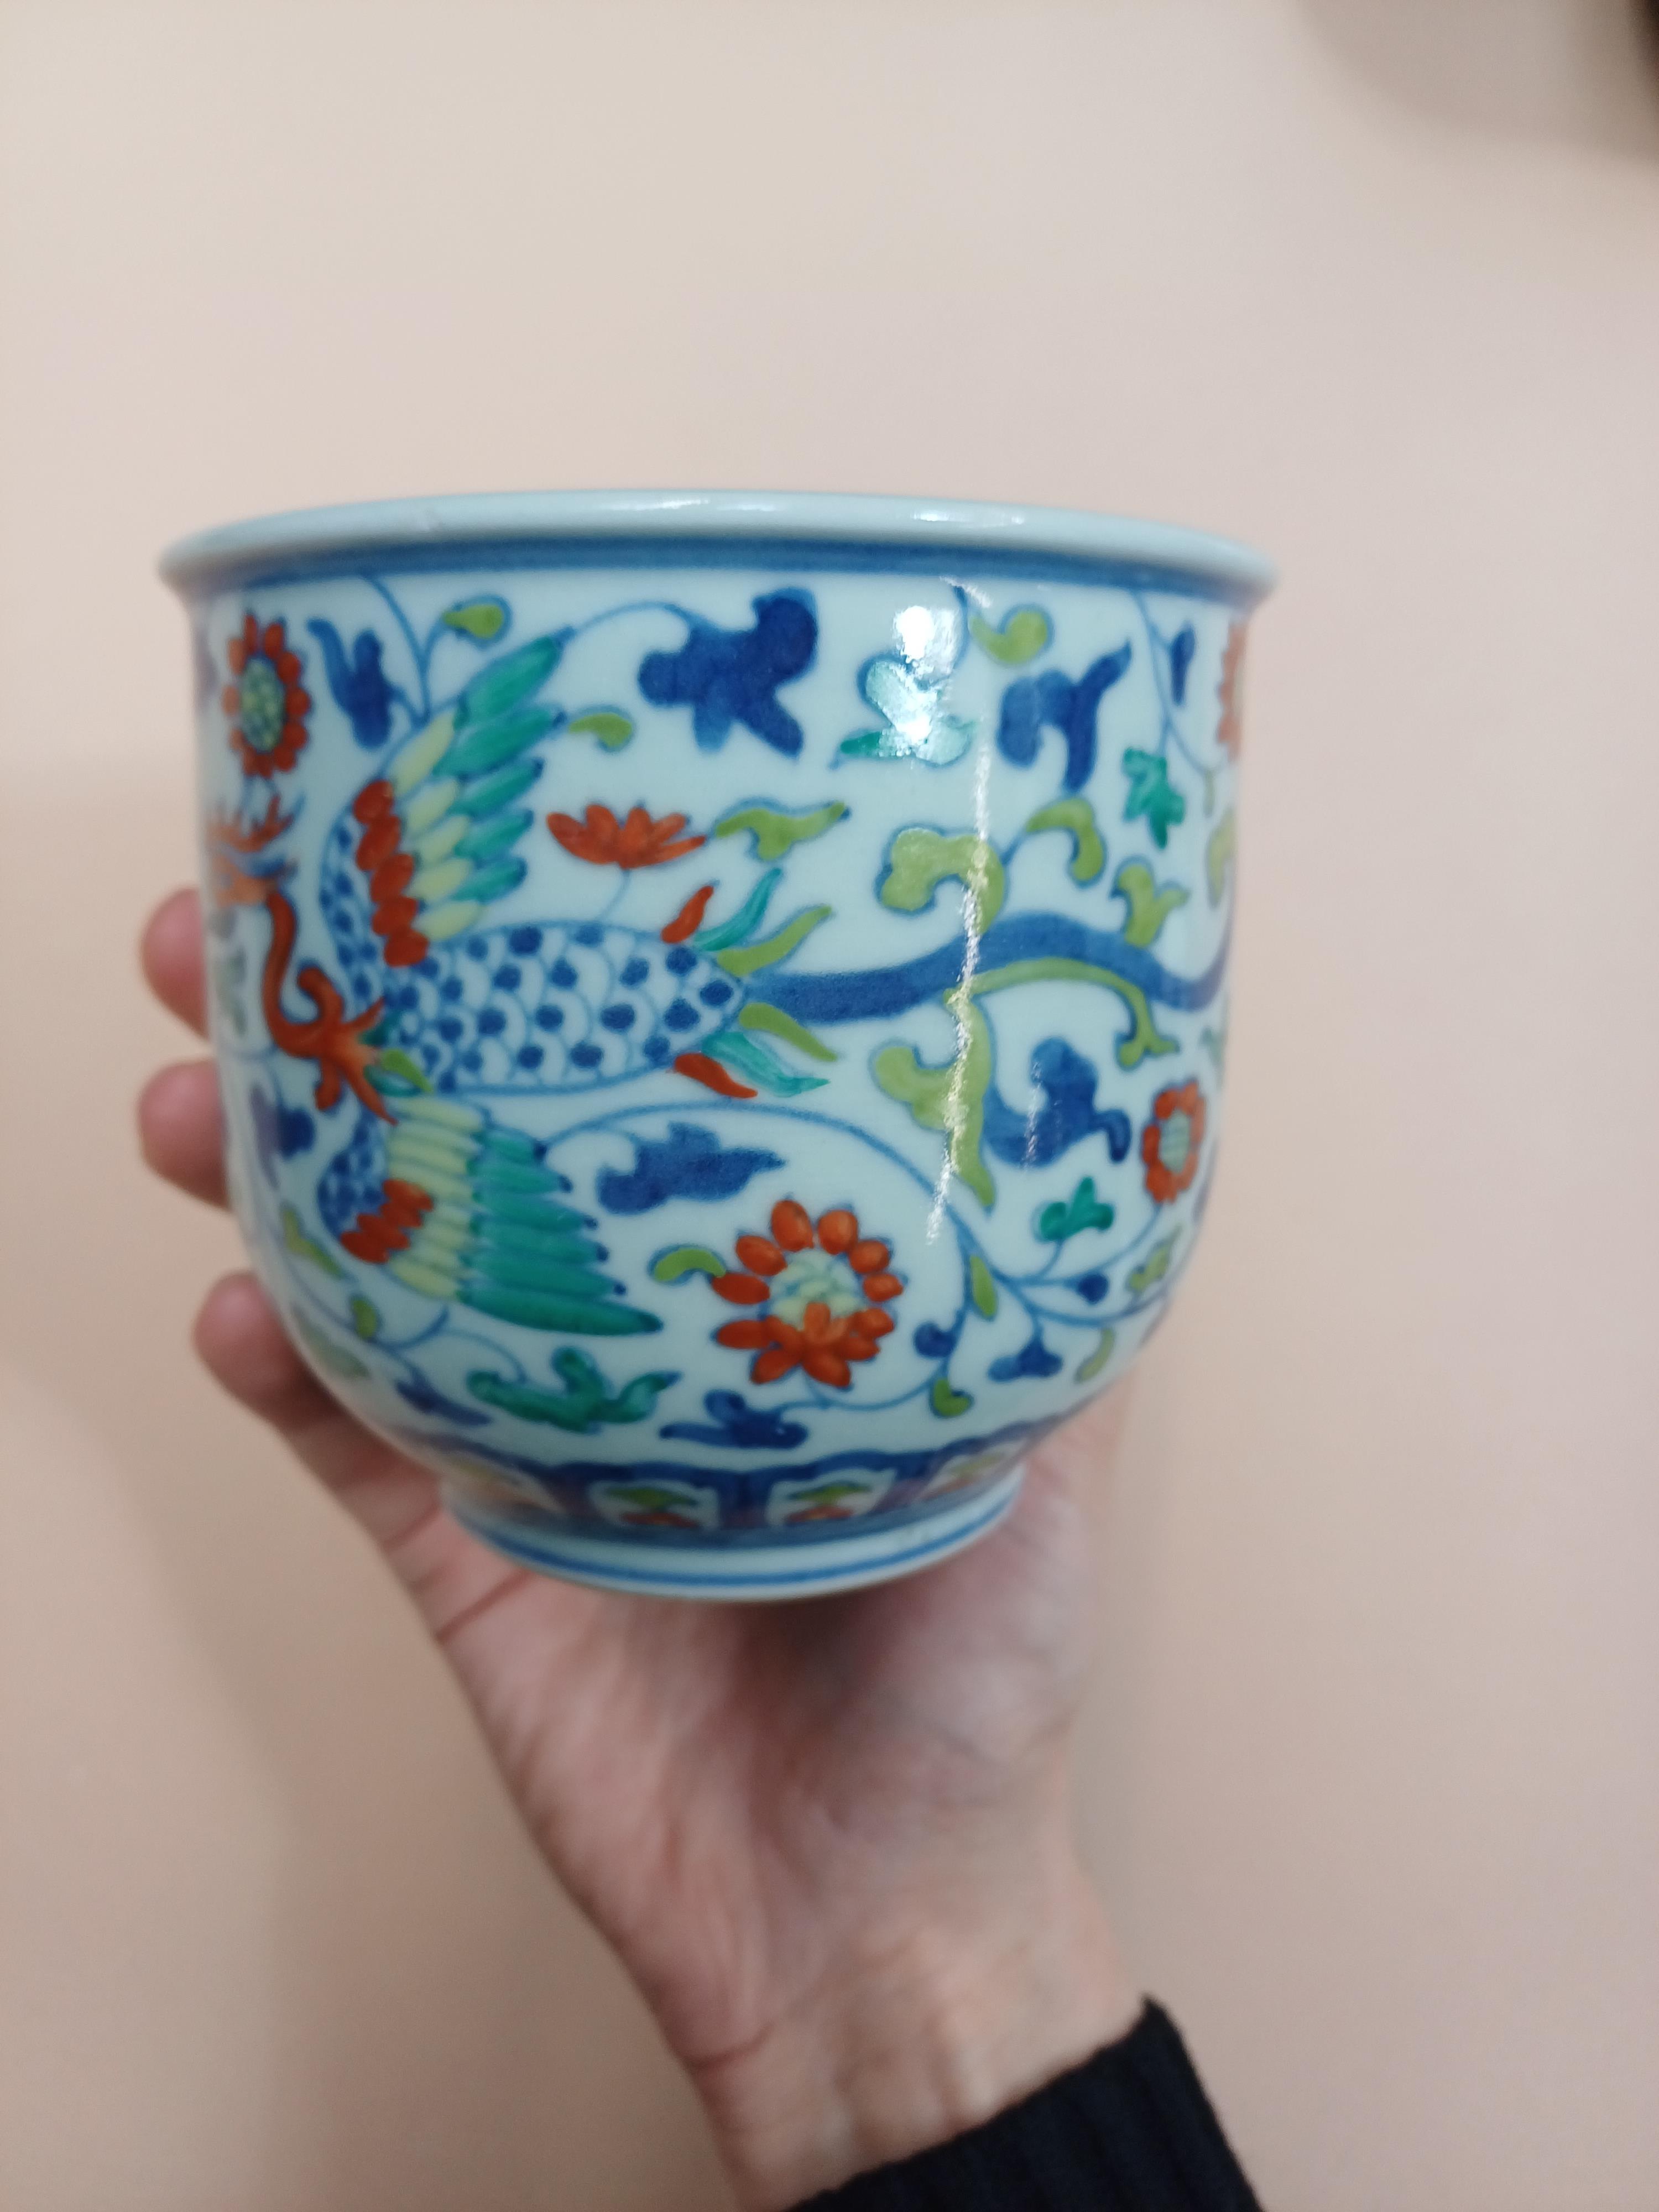 A JAPANESE IMARI POT, A FAMILLE-ROSE DISH, AND TWO JARDINIERES 十九至二十世紀 伊萬里罐，粉彩盤盆一對 - Image 7 of 17